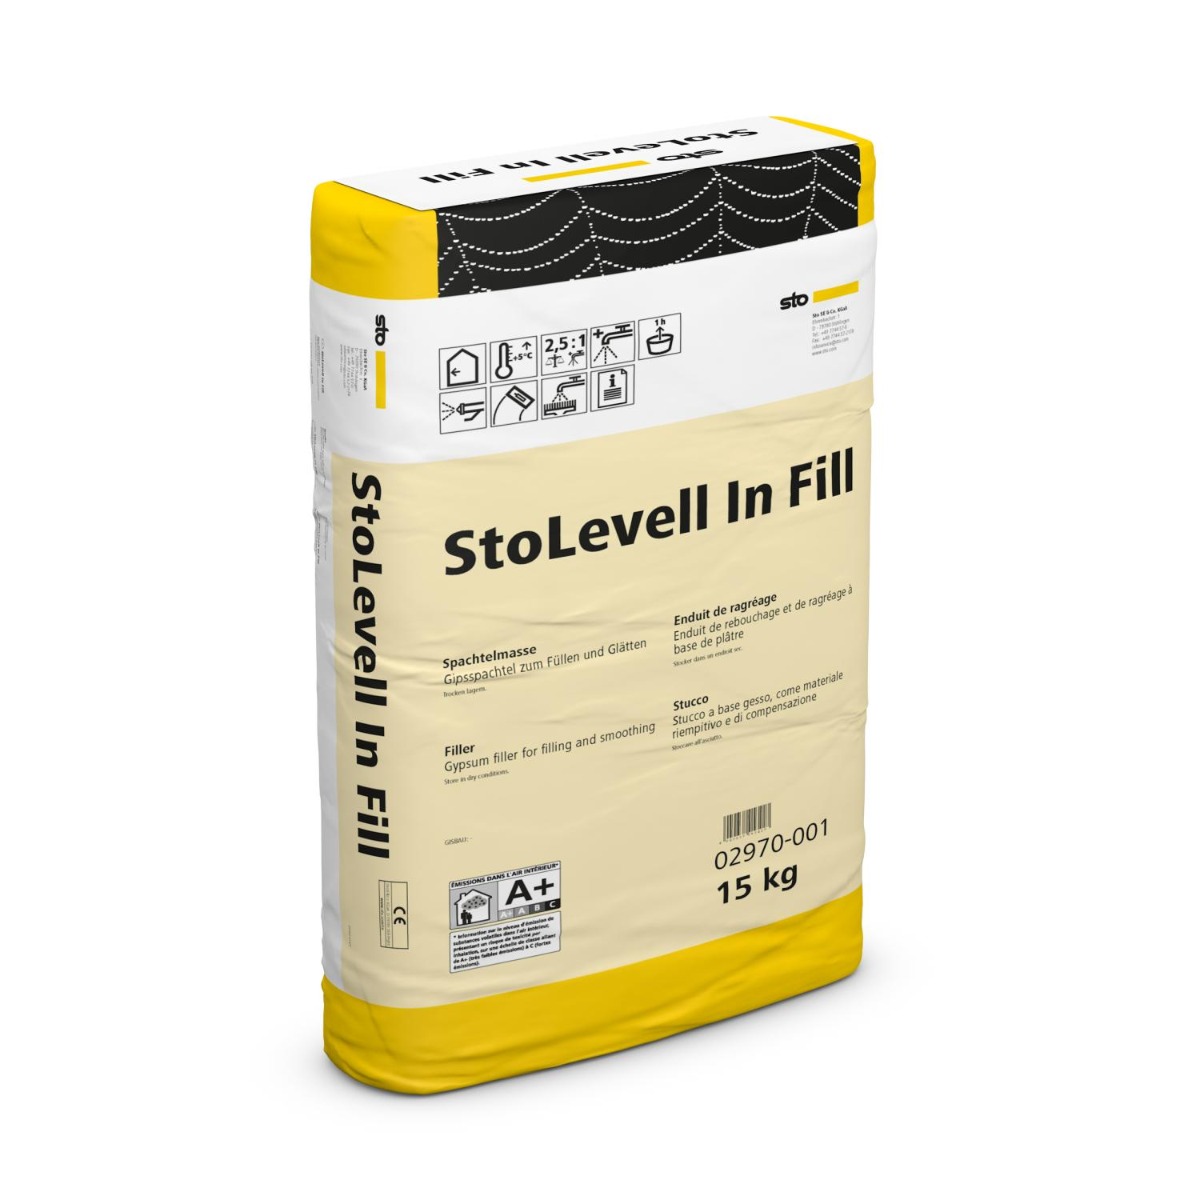 StoLevell In Fill-5 kg Sack